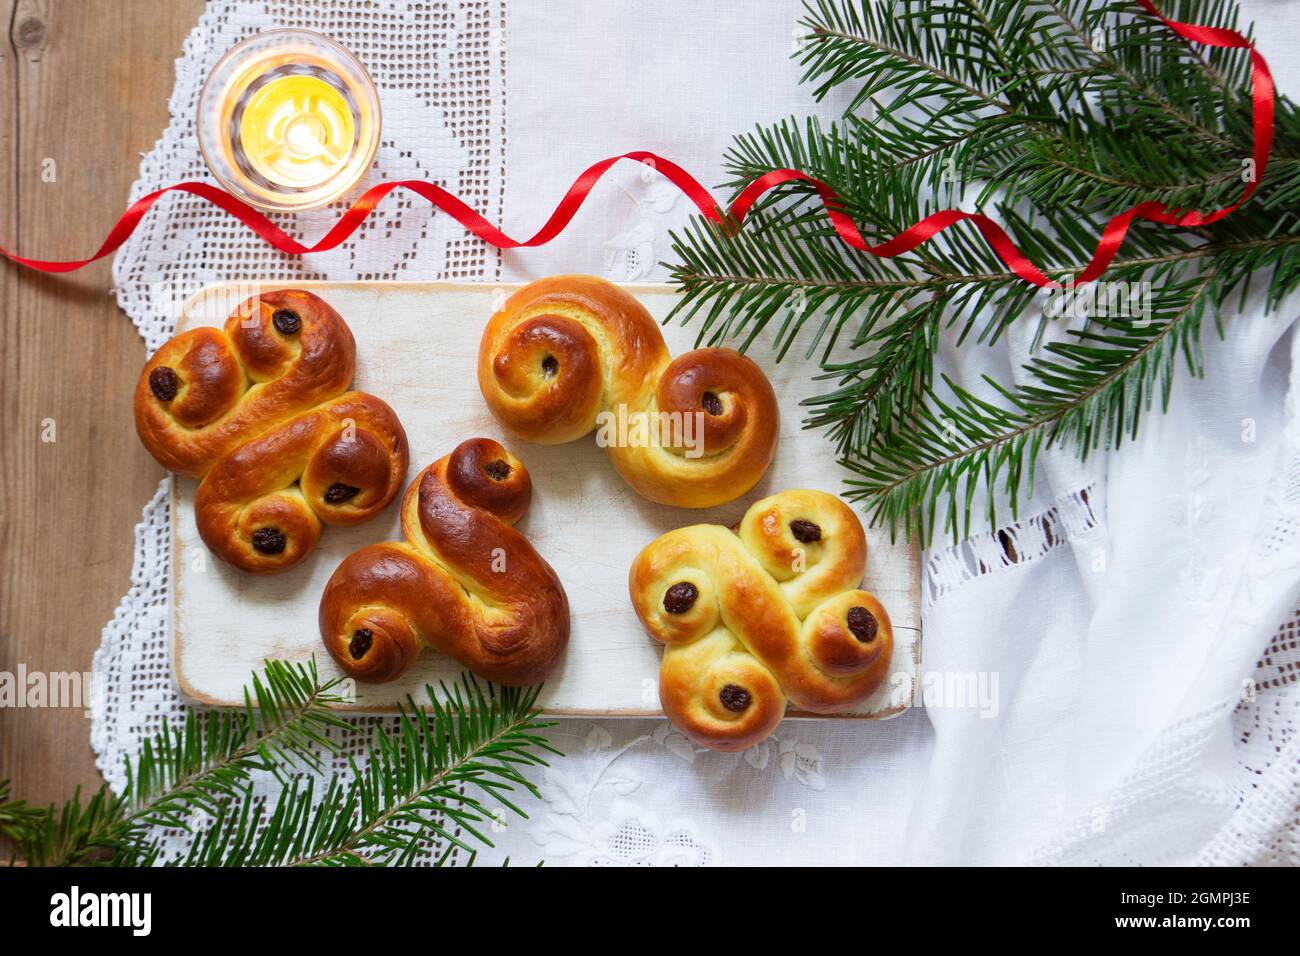 Traditional Swedish saffron buns of various shapes on a light background. Stock Photo